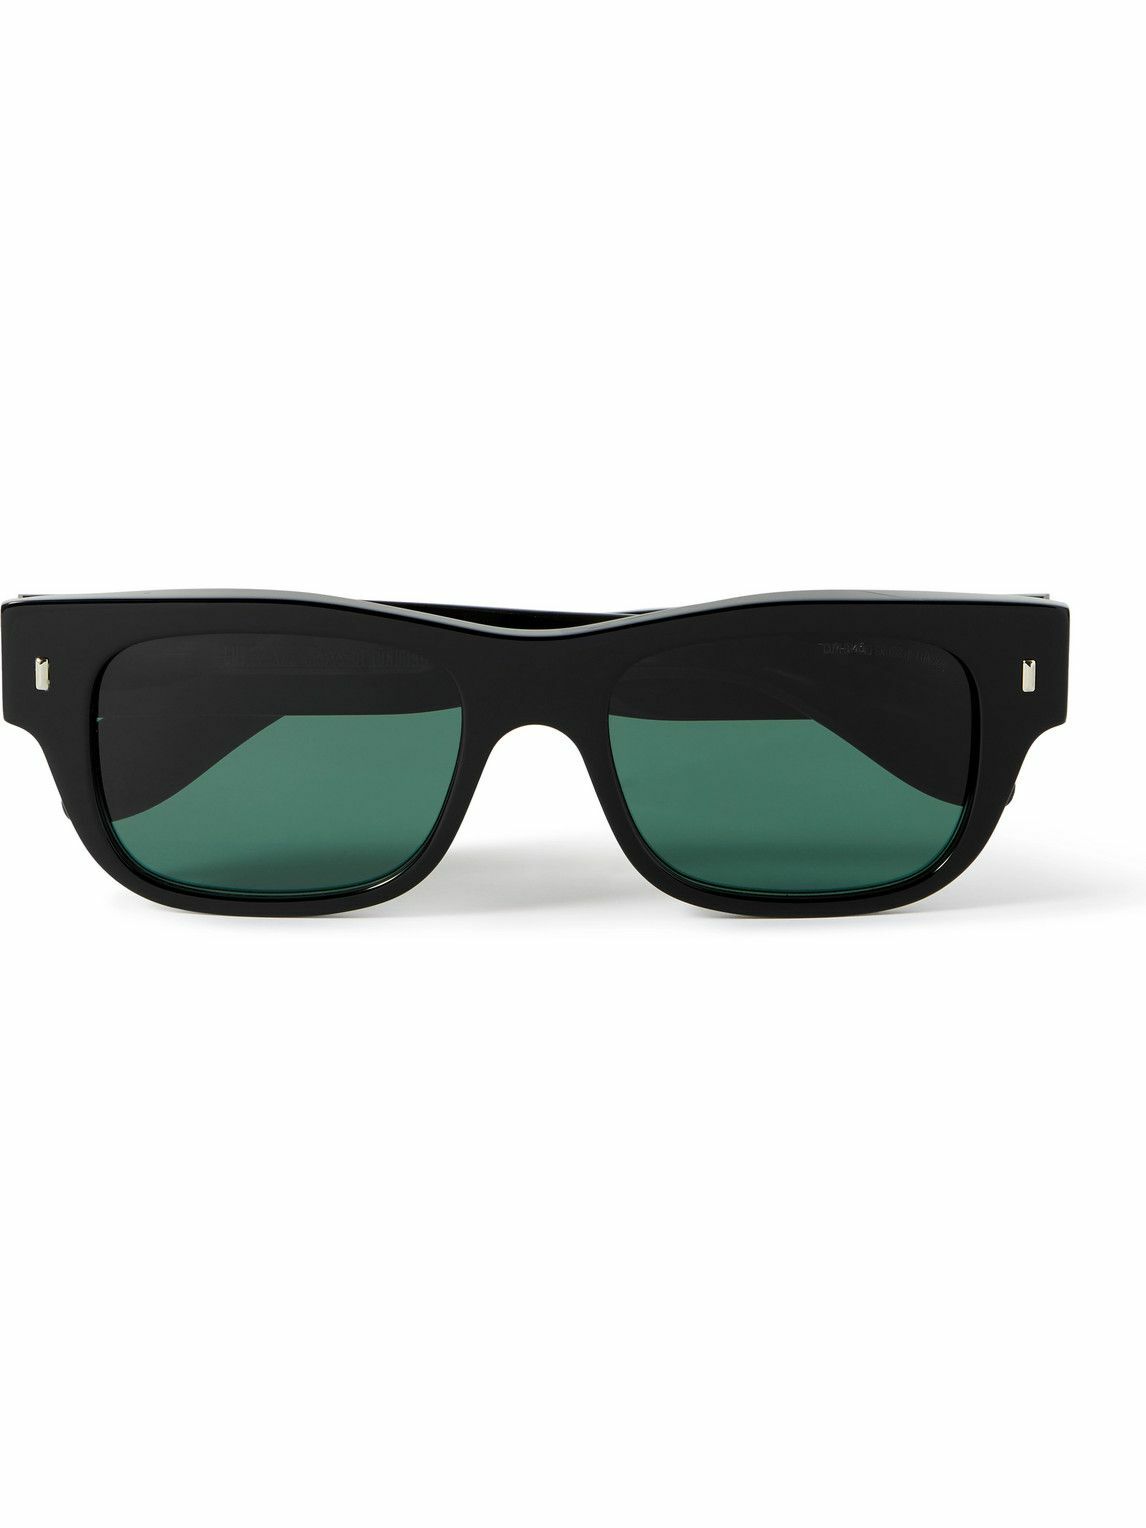 Cutler and Gross - 9692 Square-Frame Acetate Sunglasses Cutler and Gross